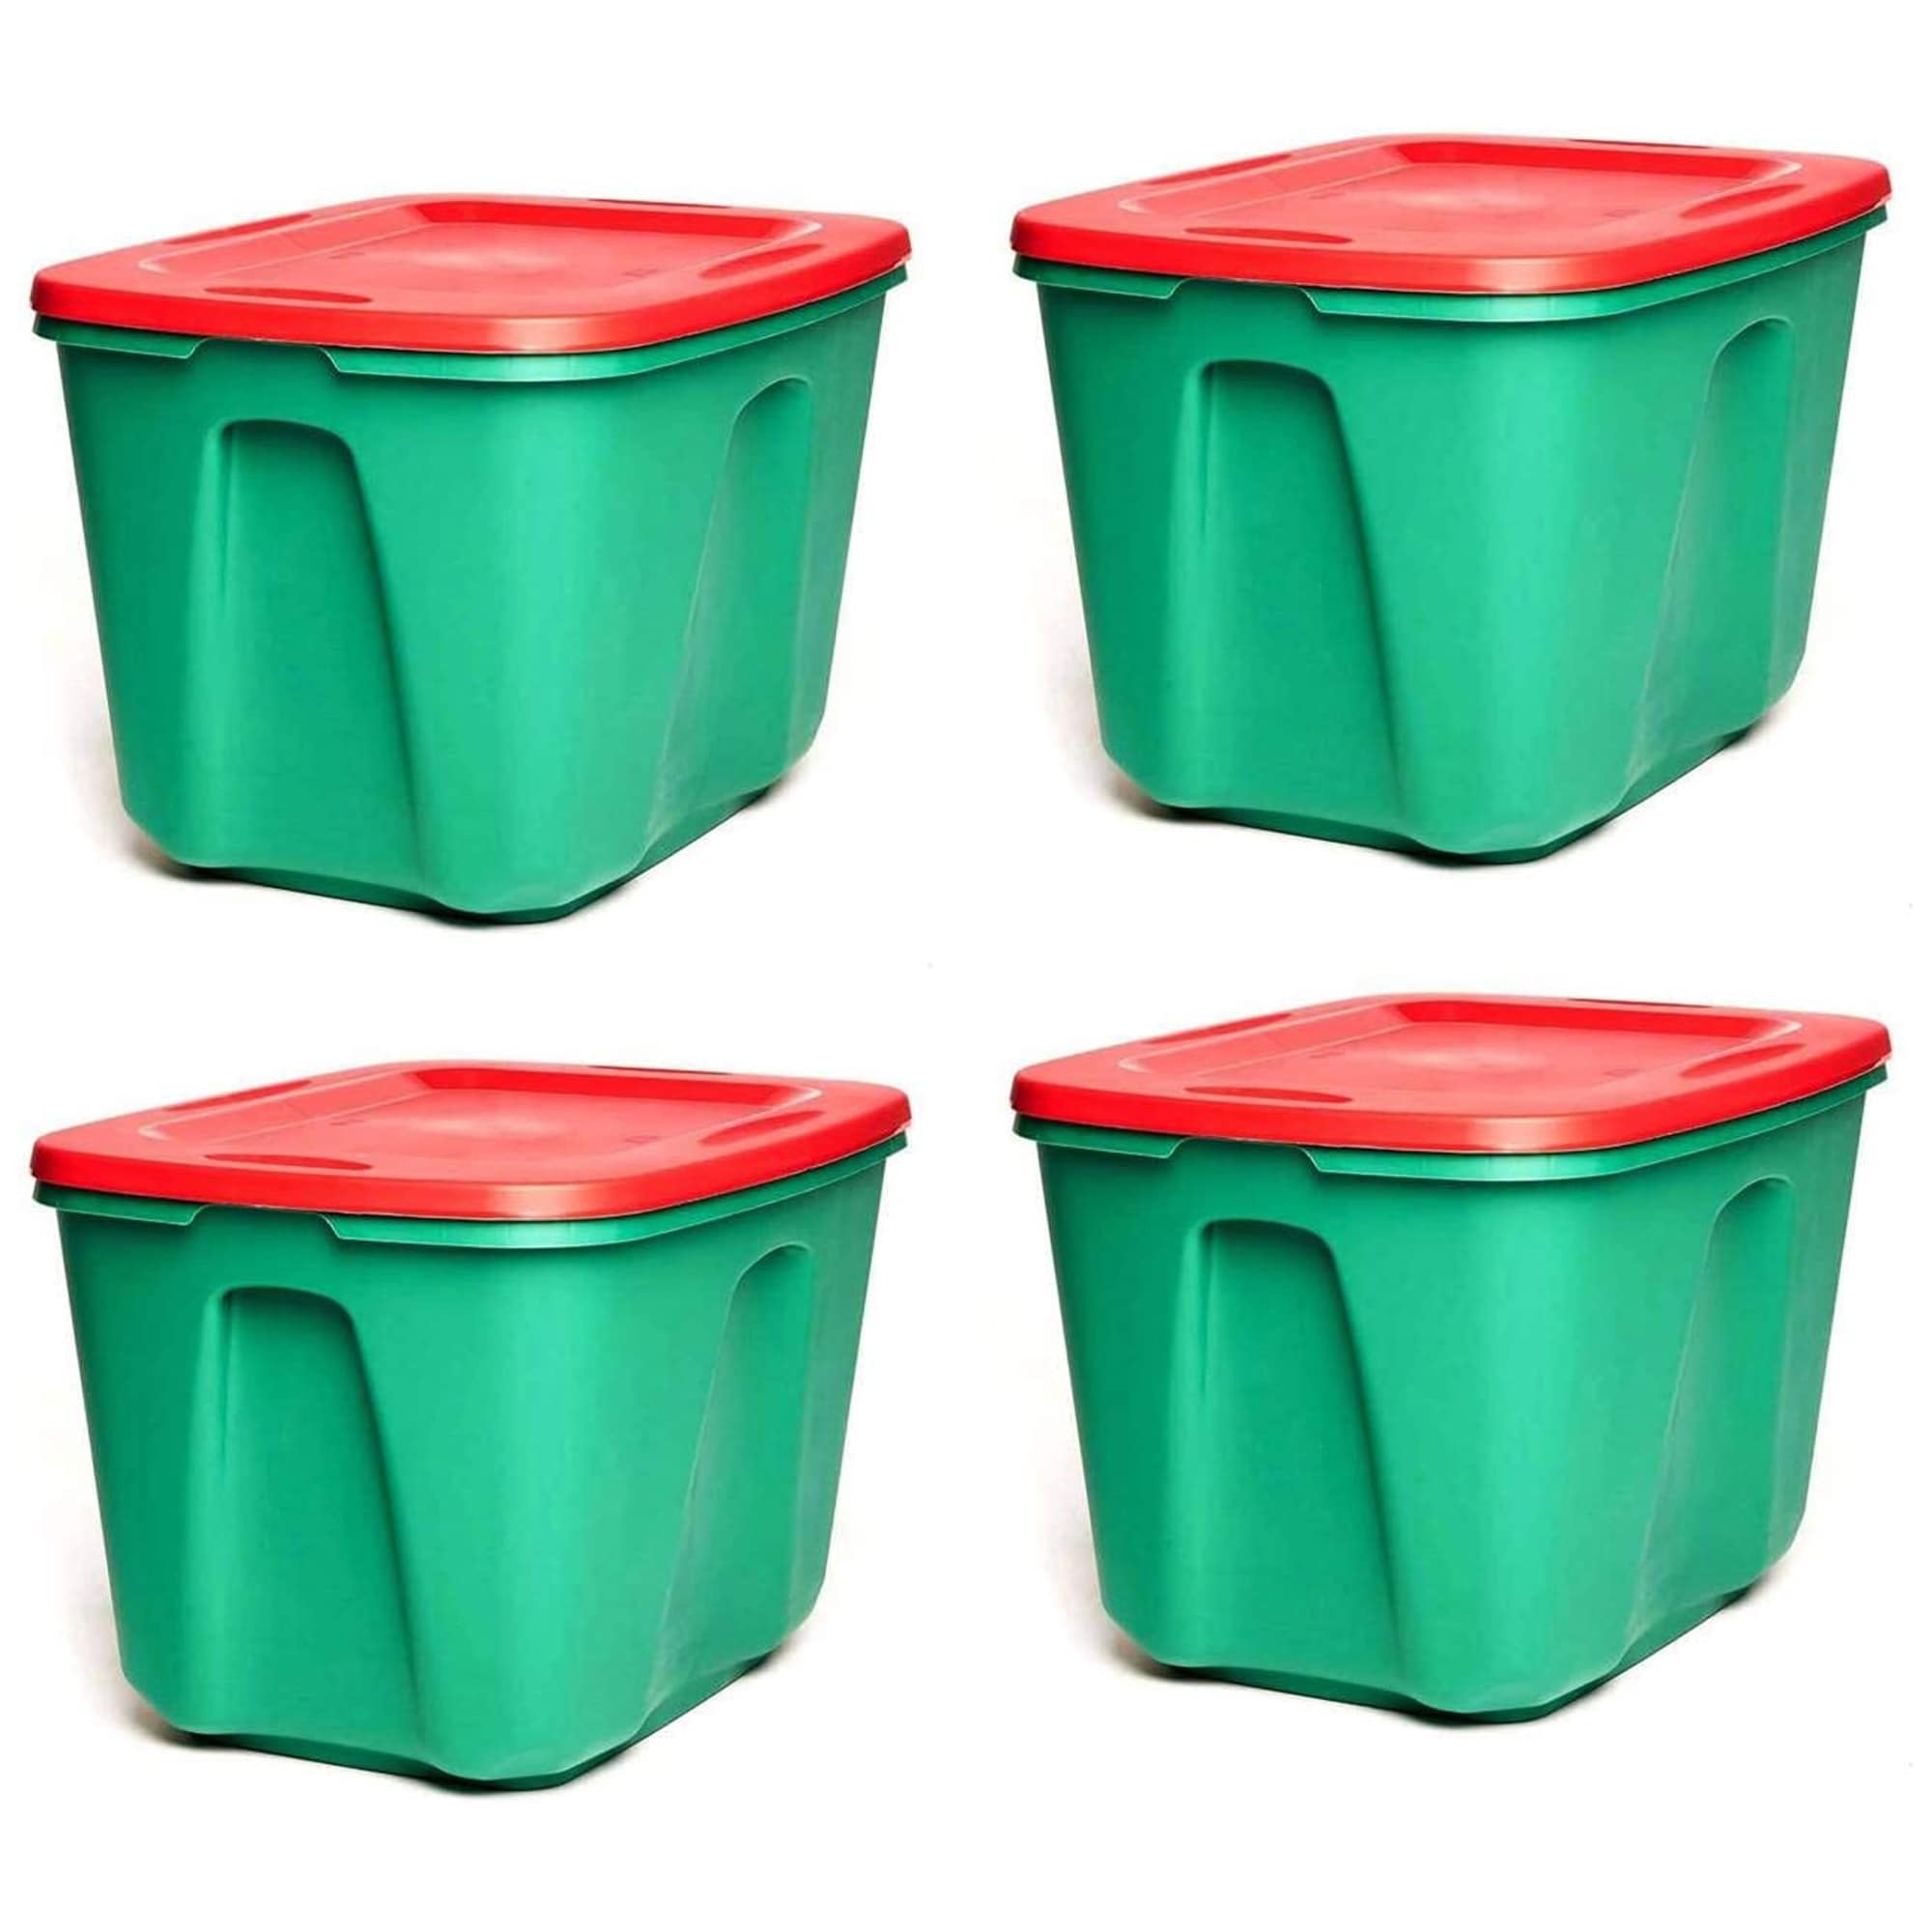 https://ak1.ostkcdn.com/images/products/is/images/direct/9d6aaa390a1270cd931e5057b1ab5e51aa063906/HOMZ-18-Gallon-Heavy-Duty-Plastic-Holiday-Storage-Totes%2C-Green-Red-%284-Pack%29.jpg